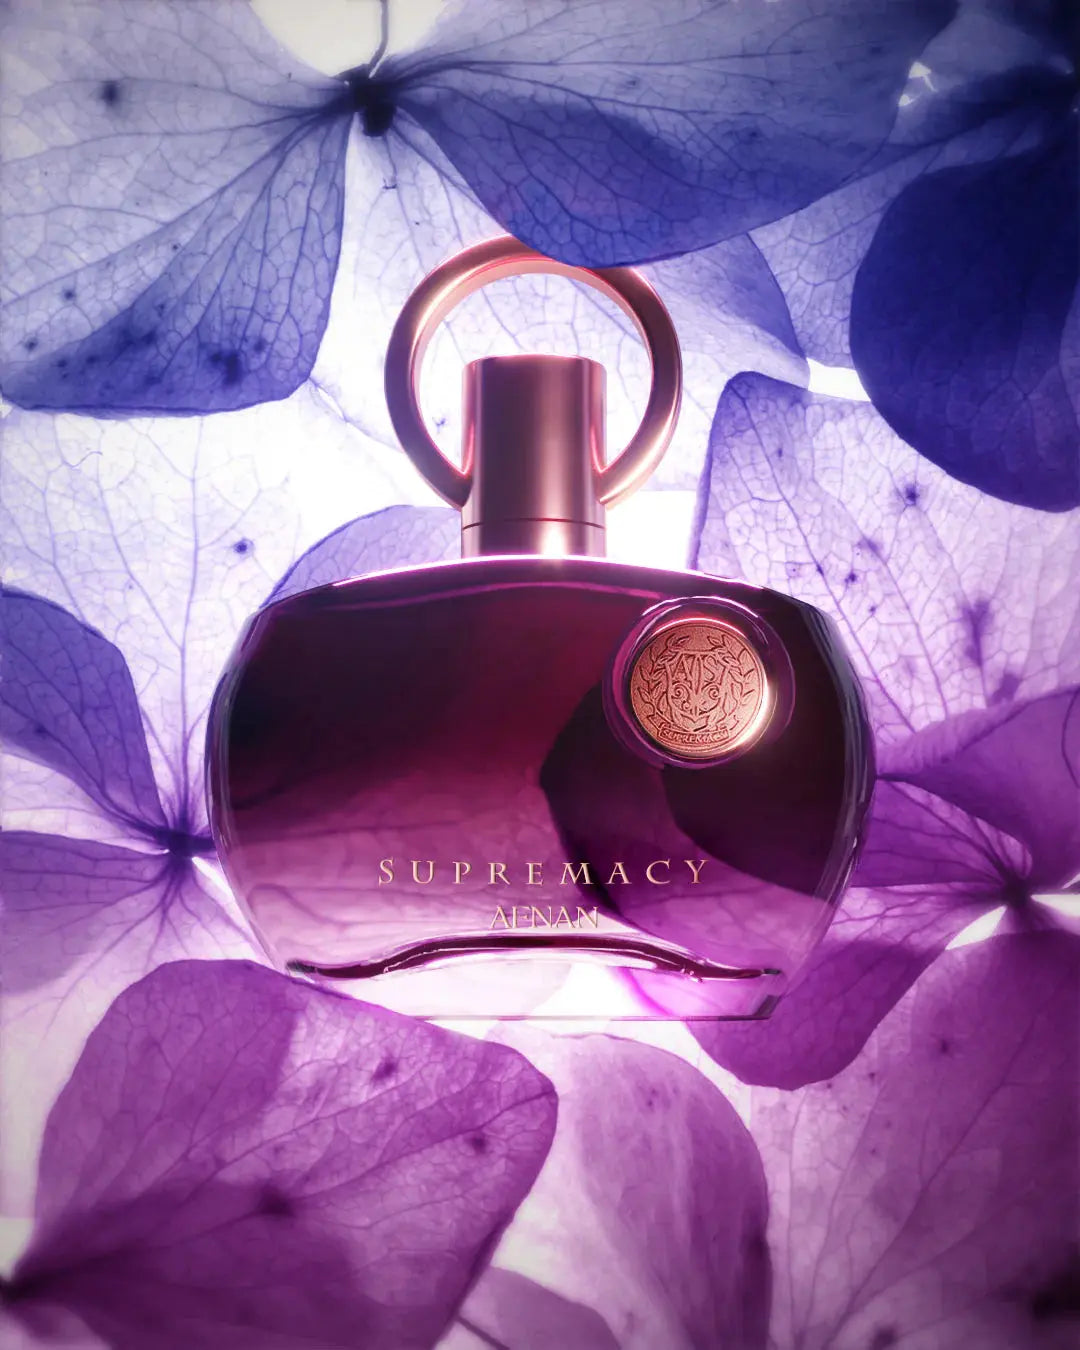 The image features an artistic presentation of a perfume bottle named "SUPREMACY" by AFNAN. The bottle is set against a backdrop of translucent purple petals that give the composition a dreamy and delicate feel. The perfume bottle, centered in the composition, has a rich, dark purple to almost black gradient color with a metallic rose gold cap and a circular loop design.  The lighting gives the bottle and the petals a luminous quality, suggesting a sense of opulence and sophistication.